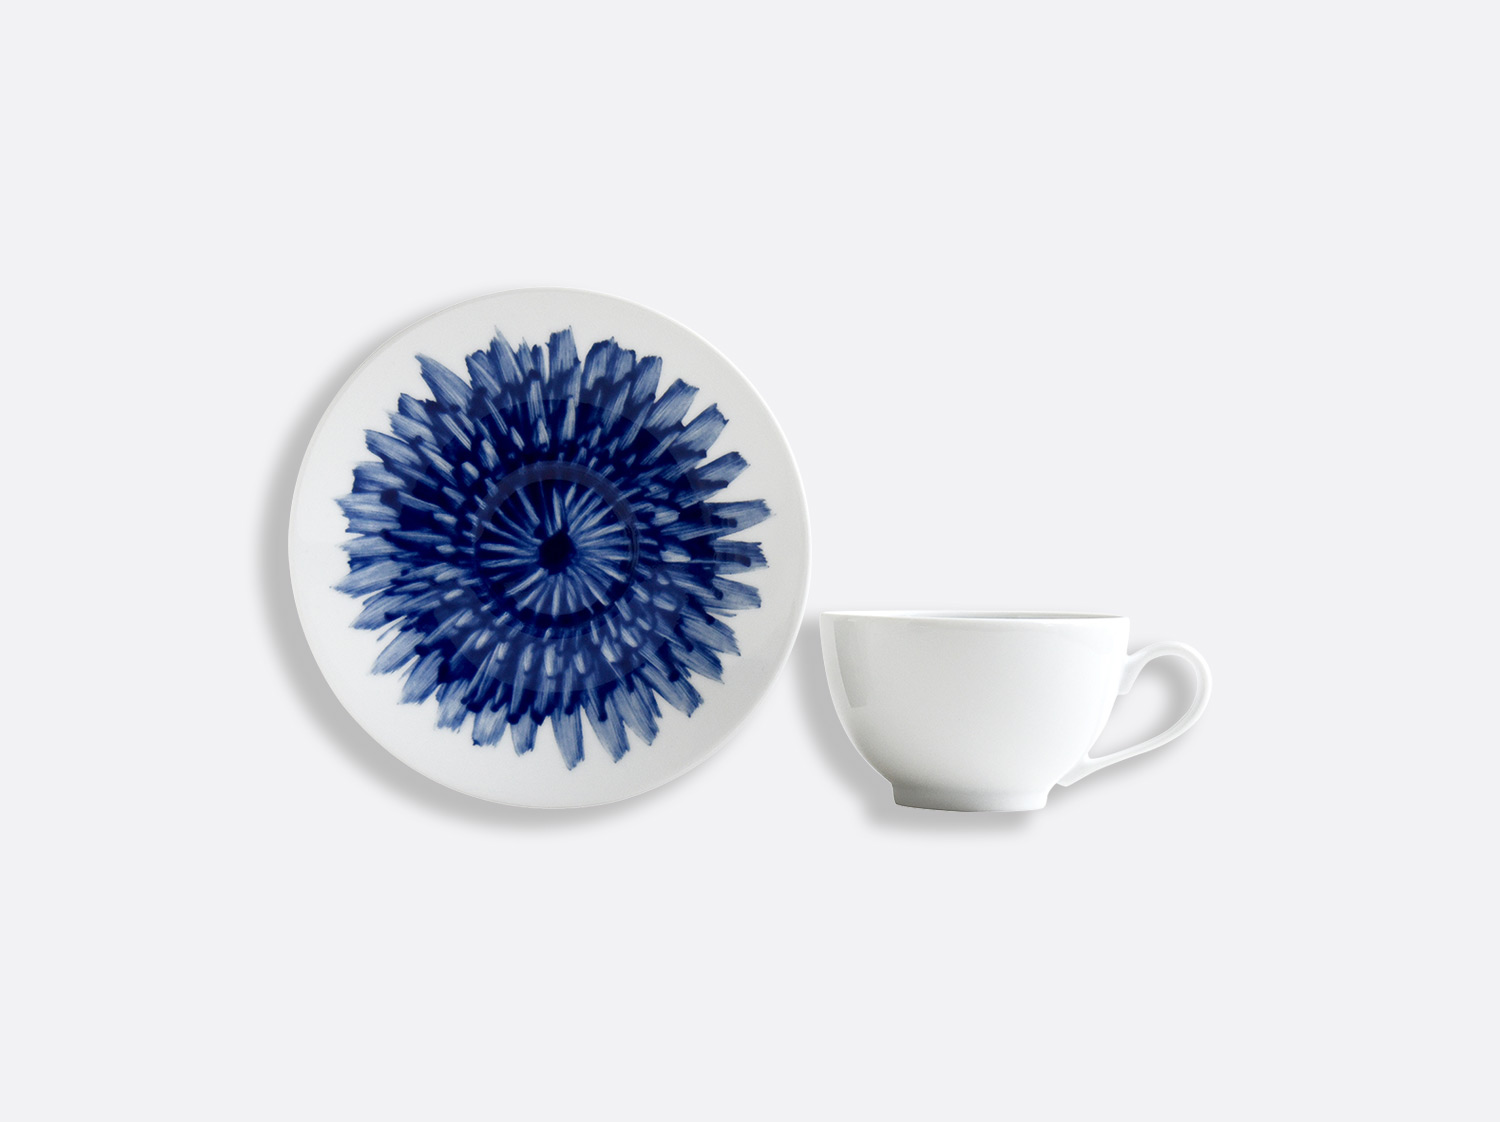 China Tea cup and saucer 4.5 oz of the collection IN BLOOM - Zemer Peled | Bernardaud